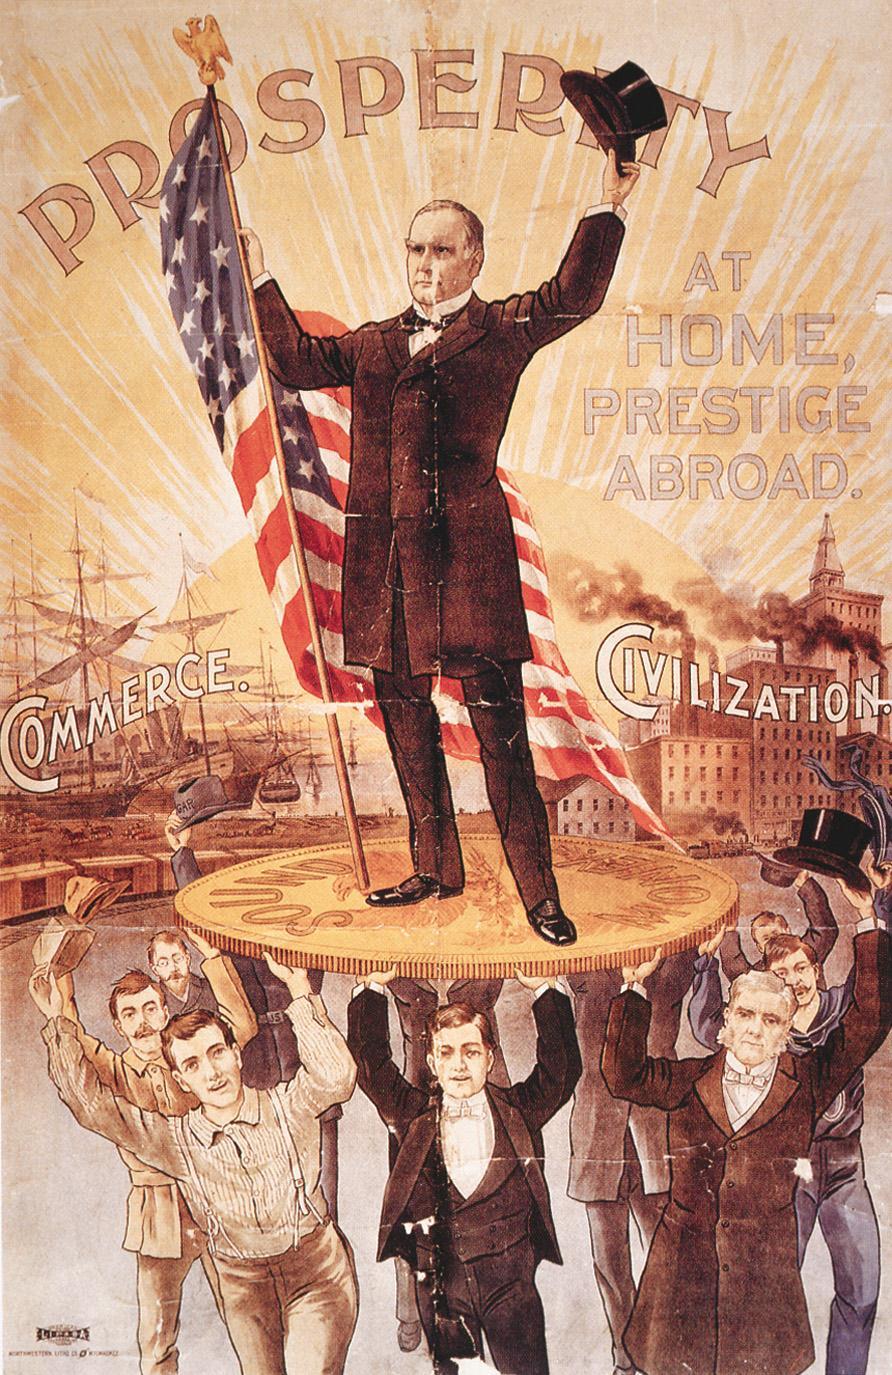 This Republican campaign poster of 1896